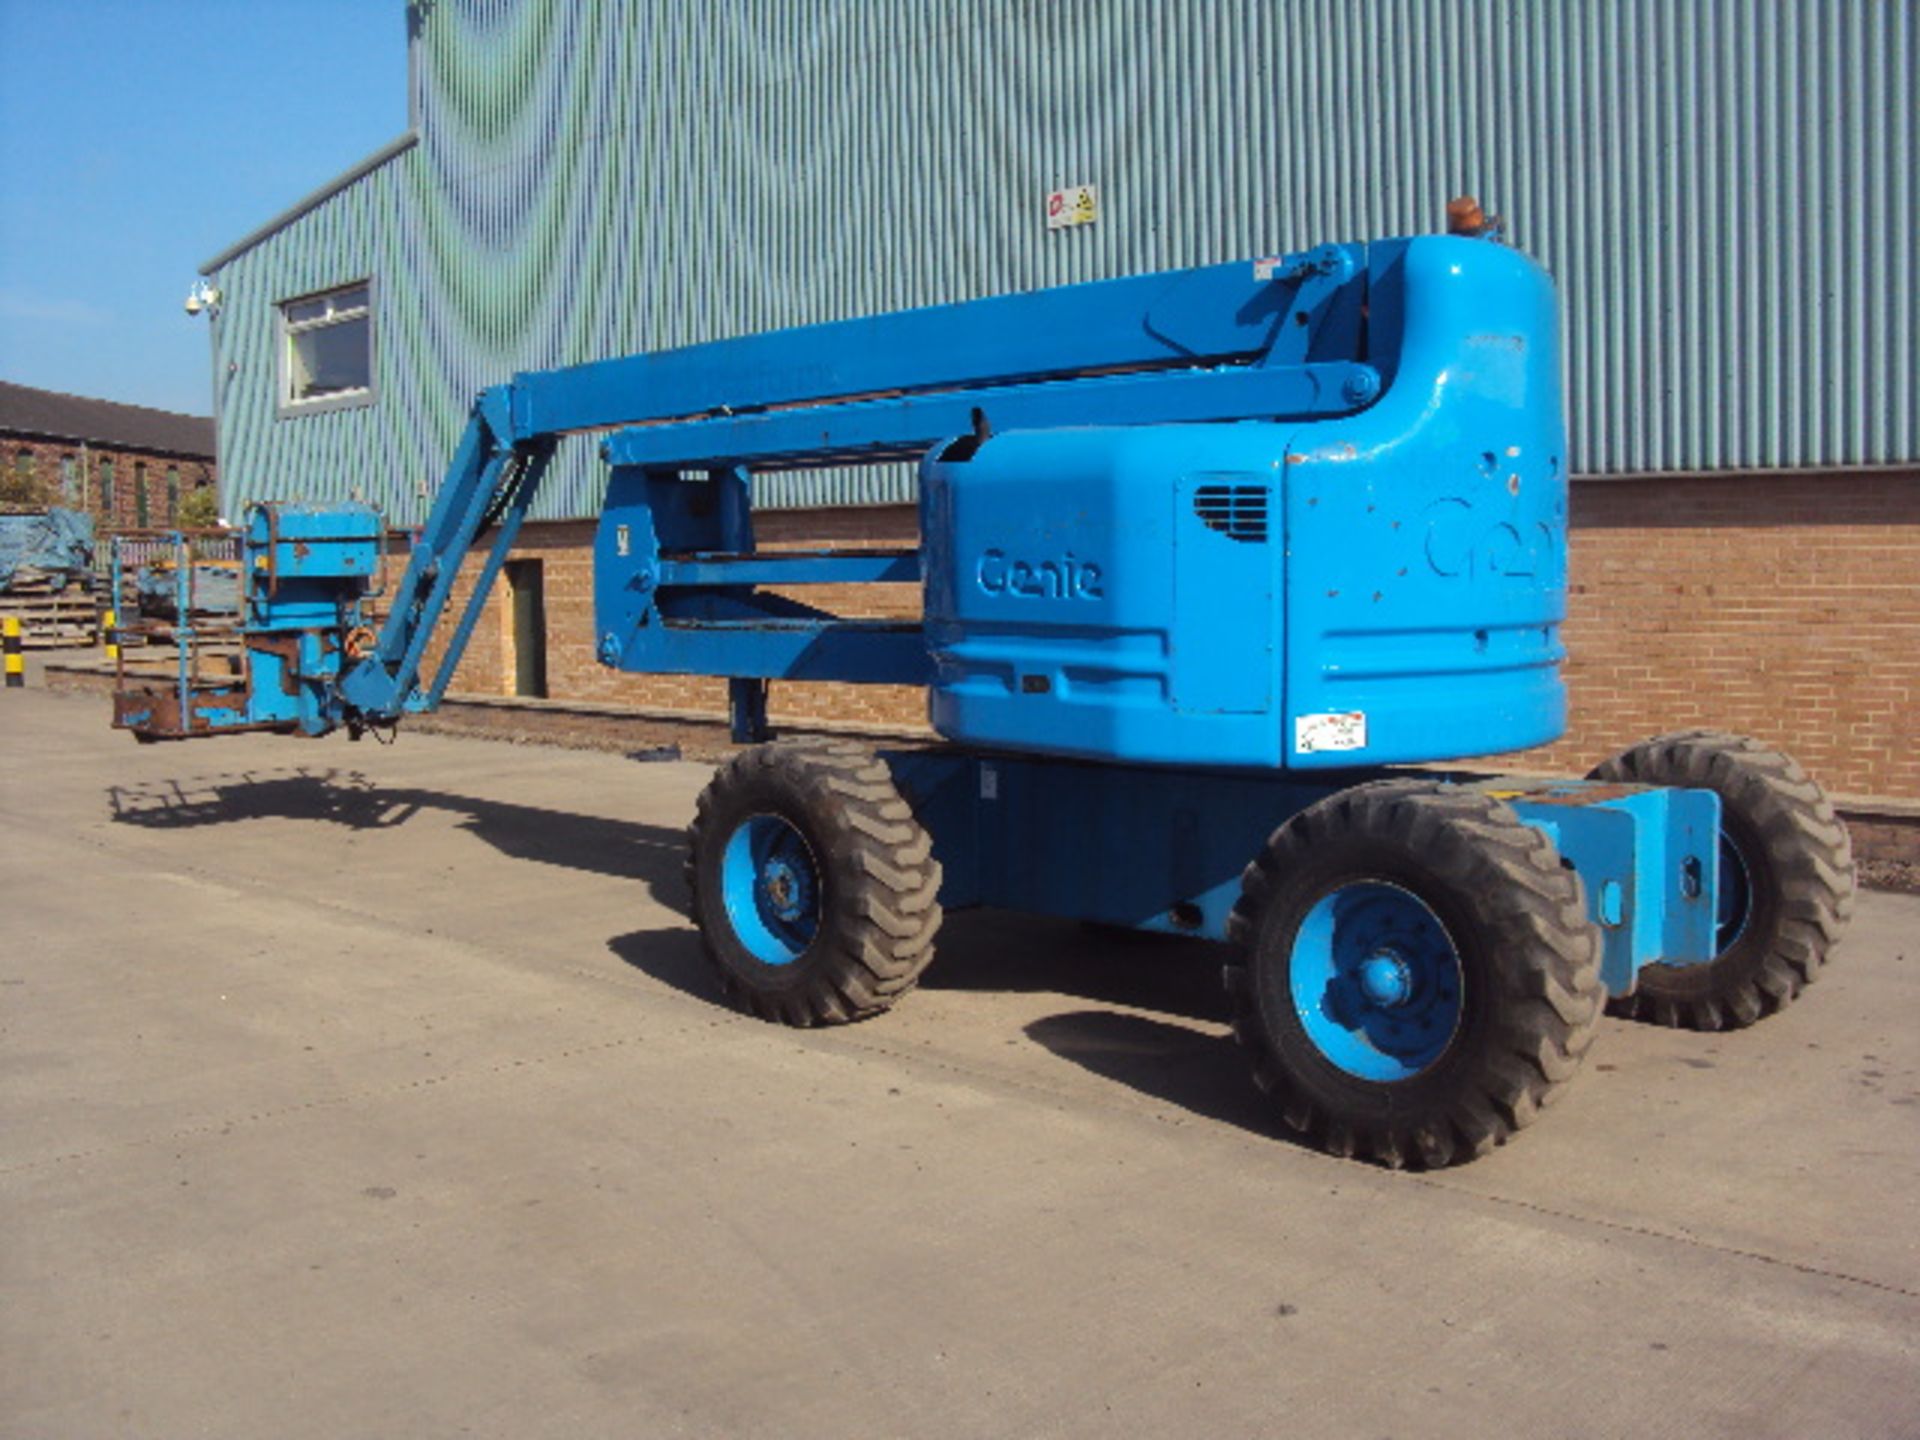 1999 GENIE Z60-34 60' 2wd articulated boom lift S/n: Z60-1983) (4991 recorded hours) (RDL) - Image 2 of 9